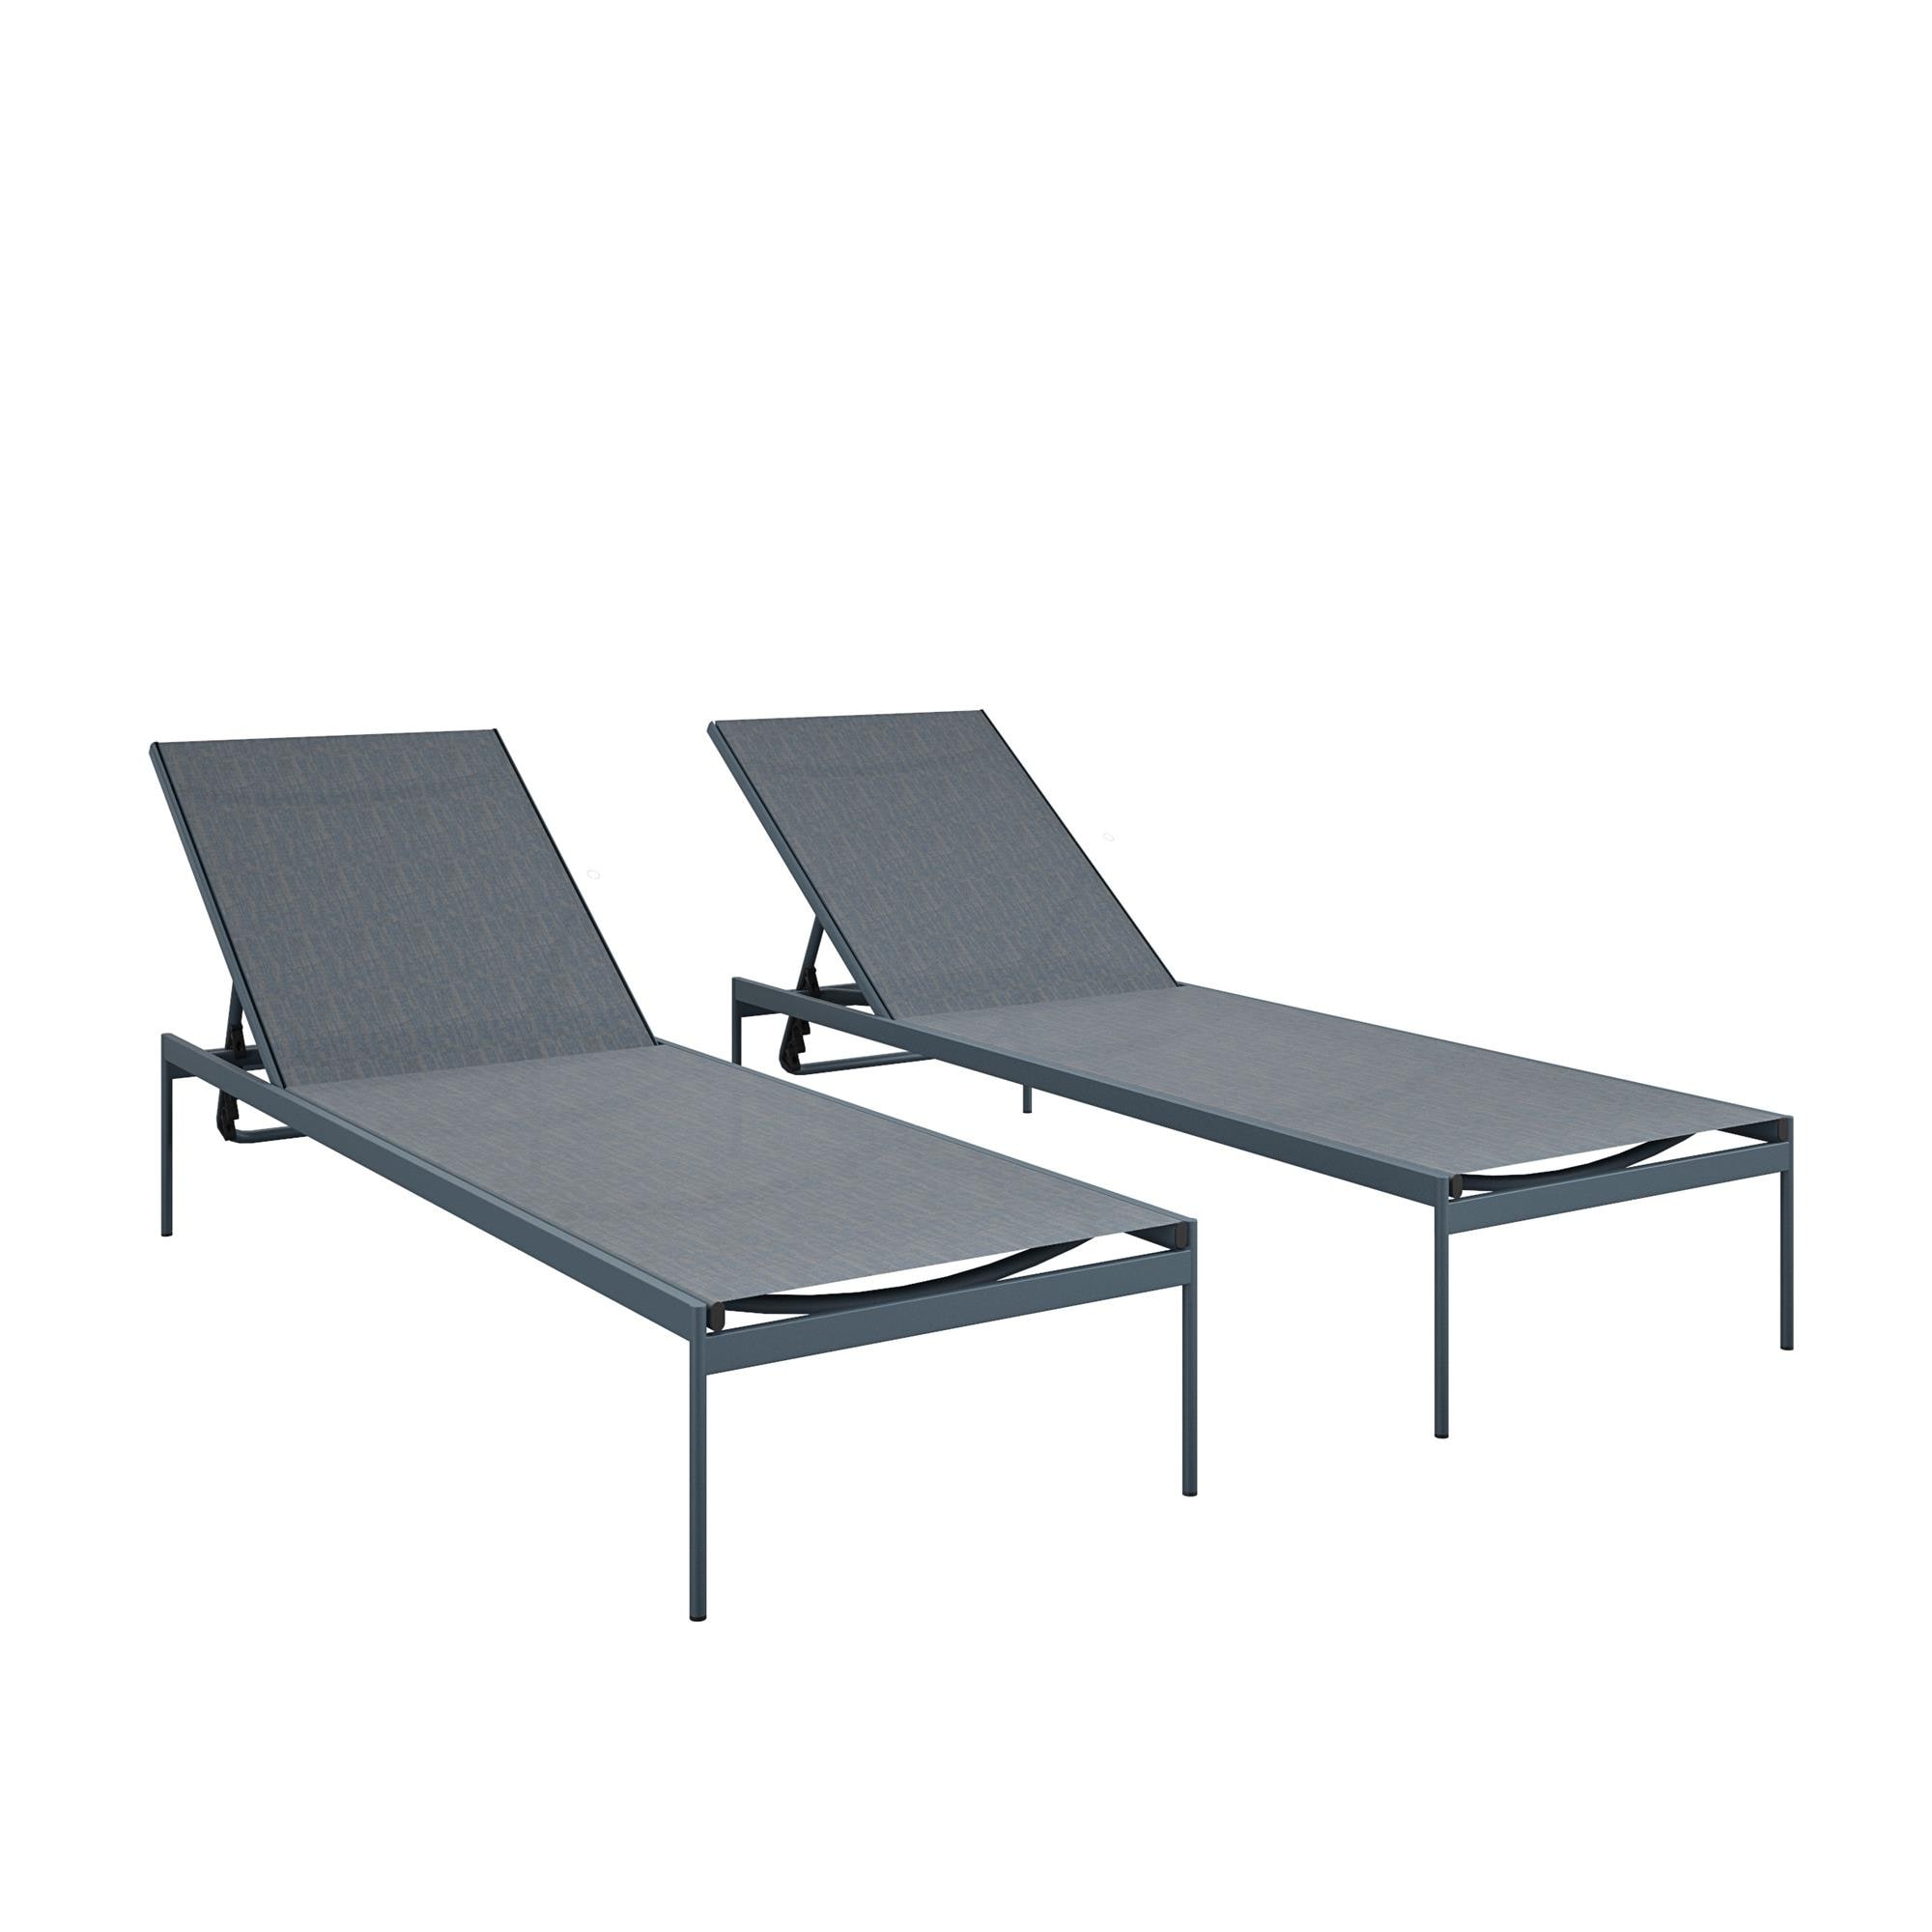 Cosco Outdoor Steel Chaise Lounge Chairs